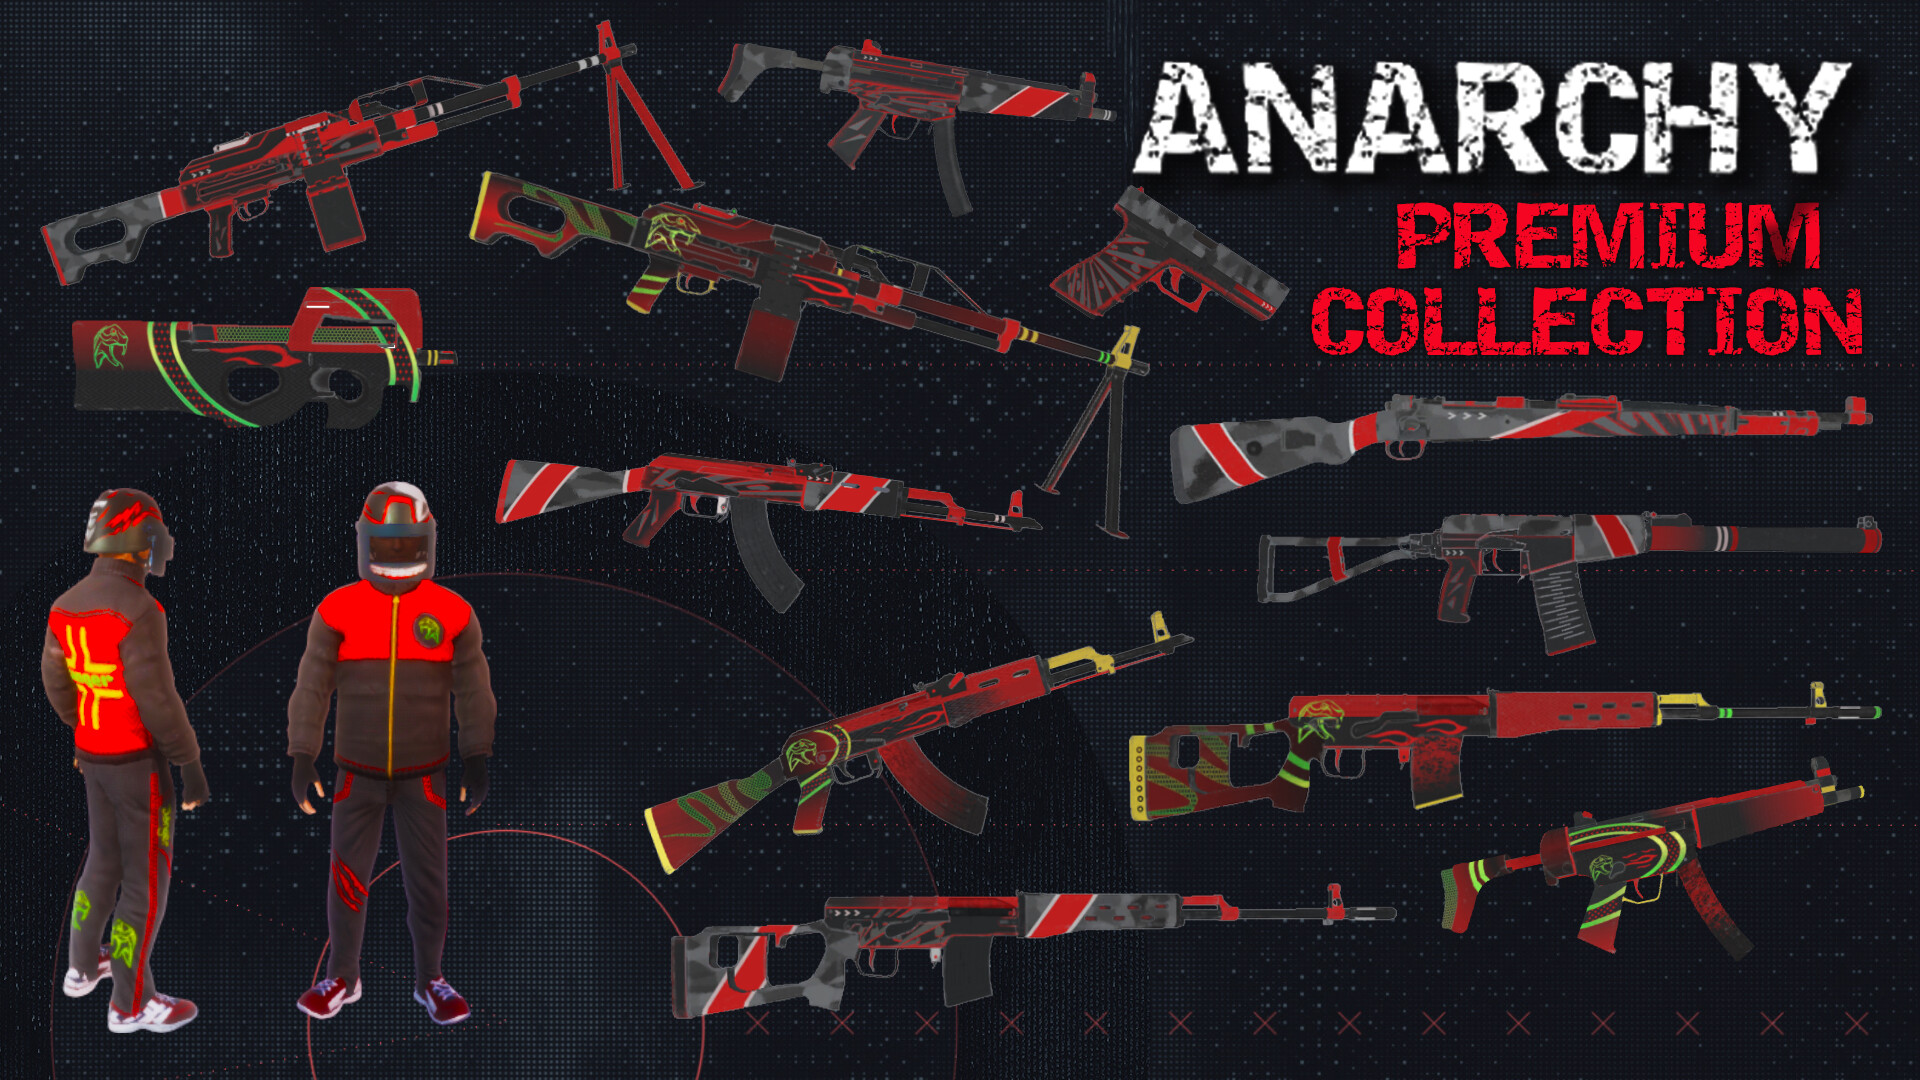 Anarchy: Premium Collection Featured Screenshot #1